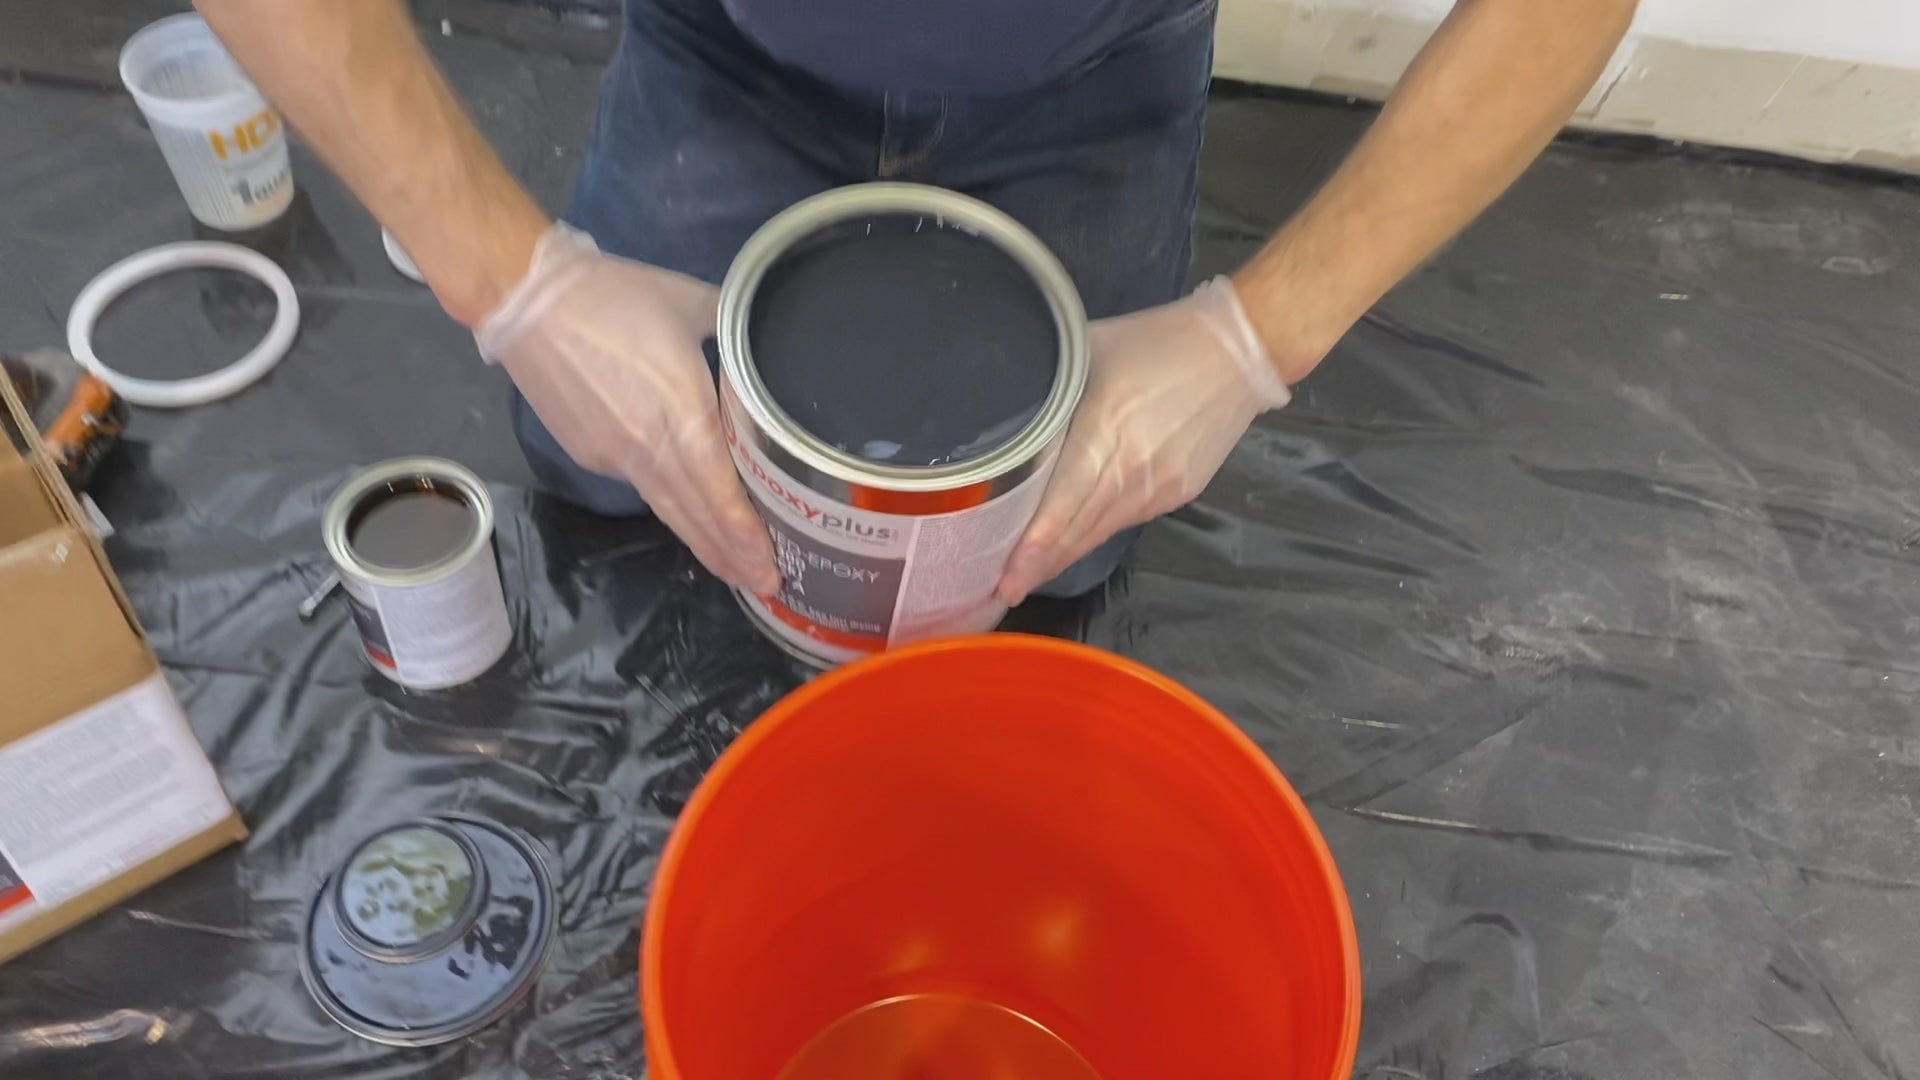 Enhance Adhesion with BLACK DESIGNER METALLIC EPOXY PRIMER - Ideal for DIY Projects